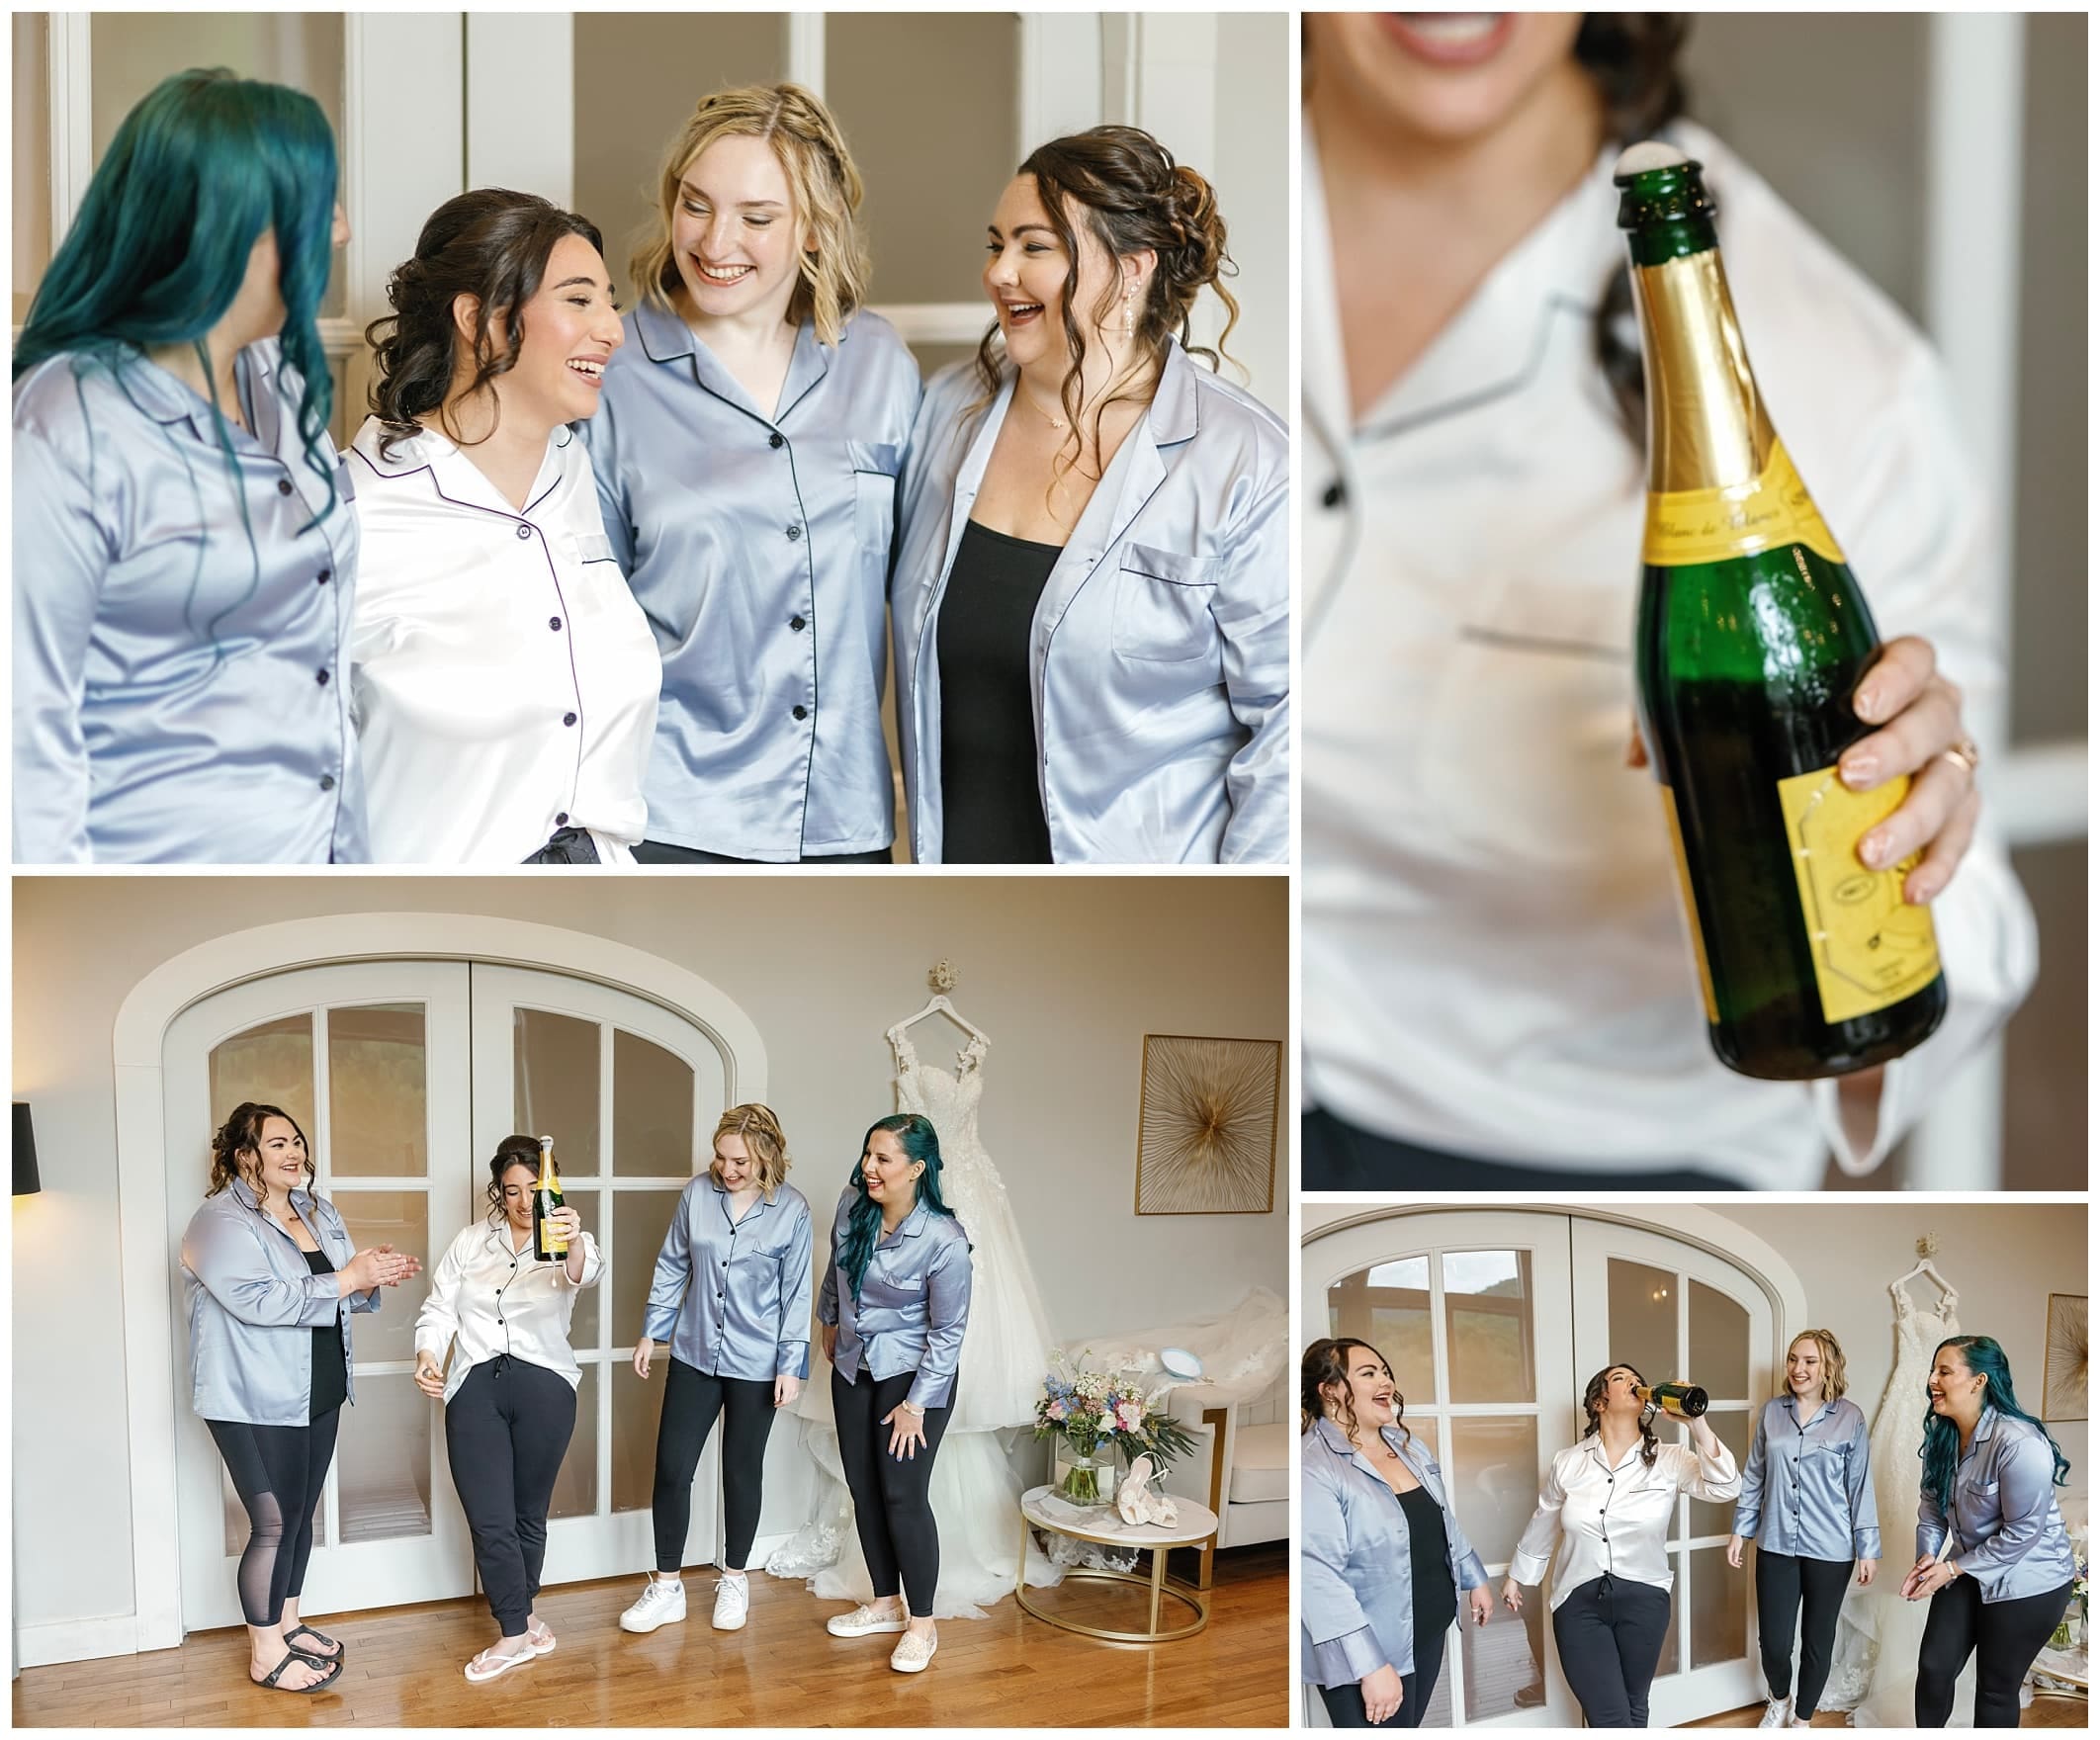 Bride and bridesmaids in pjs pop open a bottle of champagne before wedding ceremony